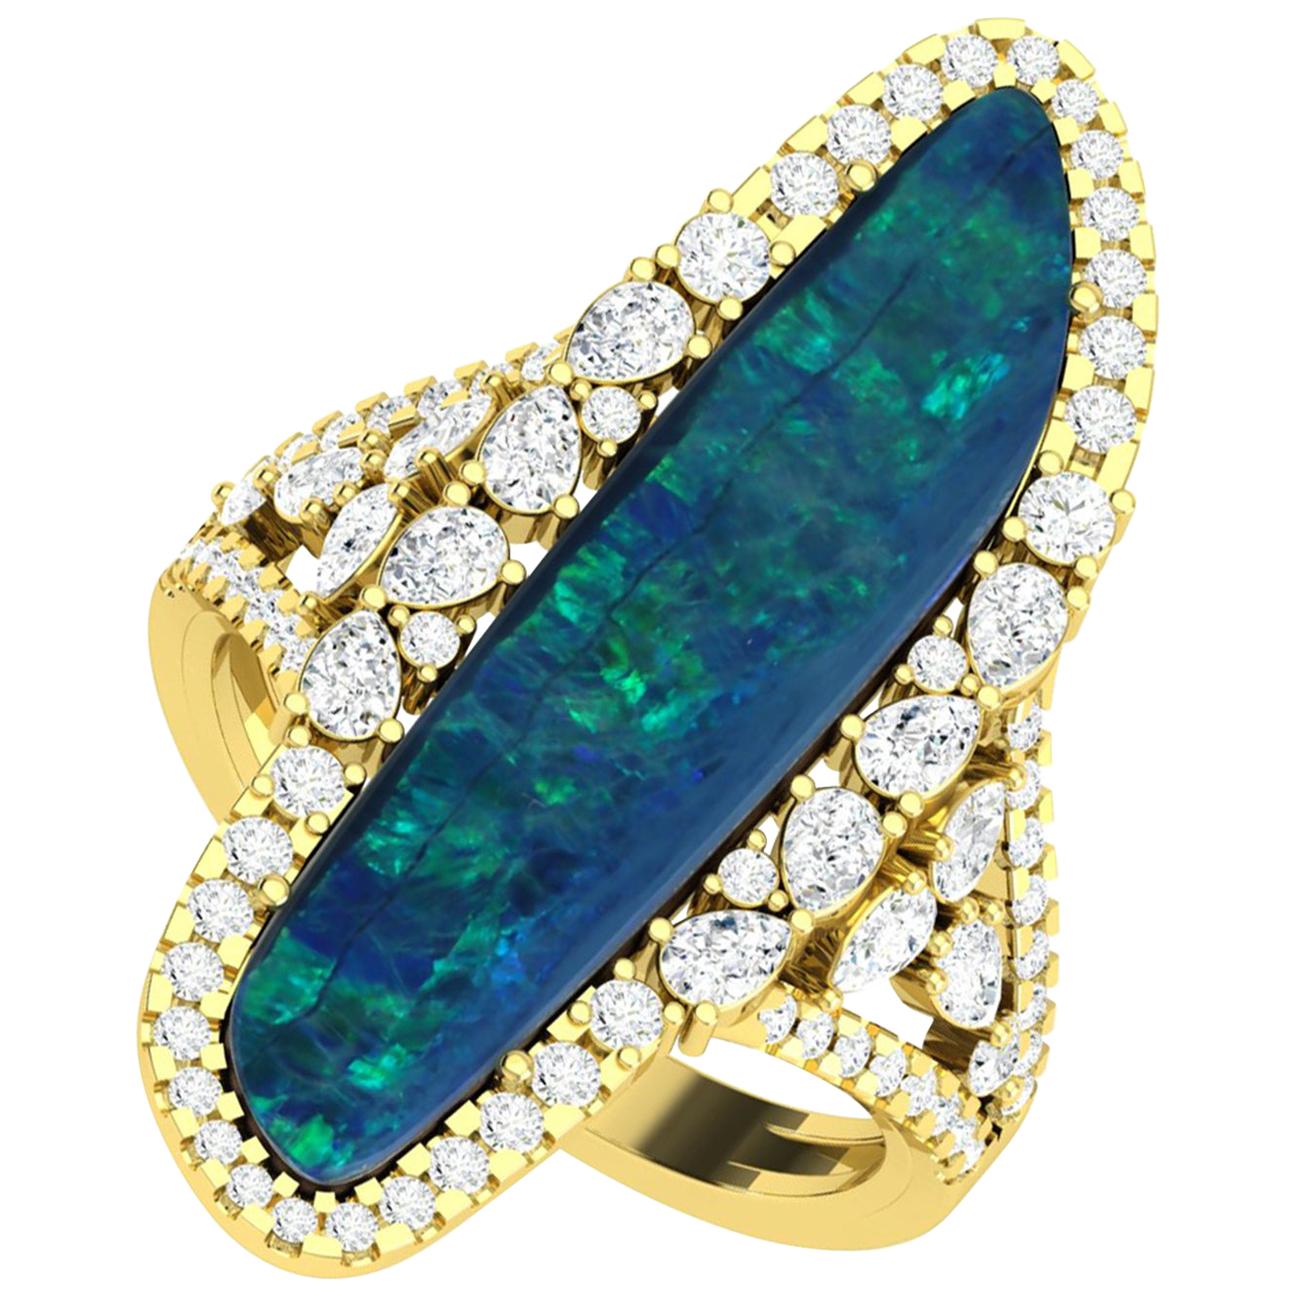 4.35ct Opal Ring With Diamonds Made In 18 Karat Yellow Gold  For Sale